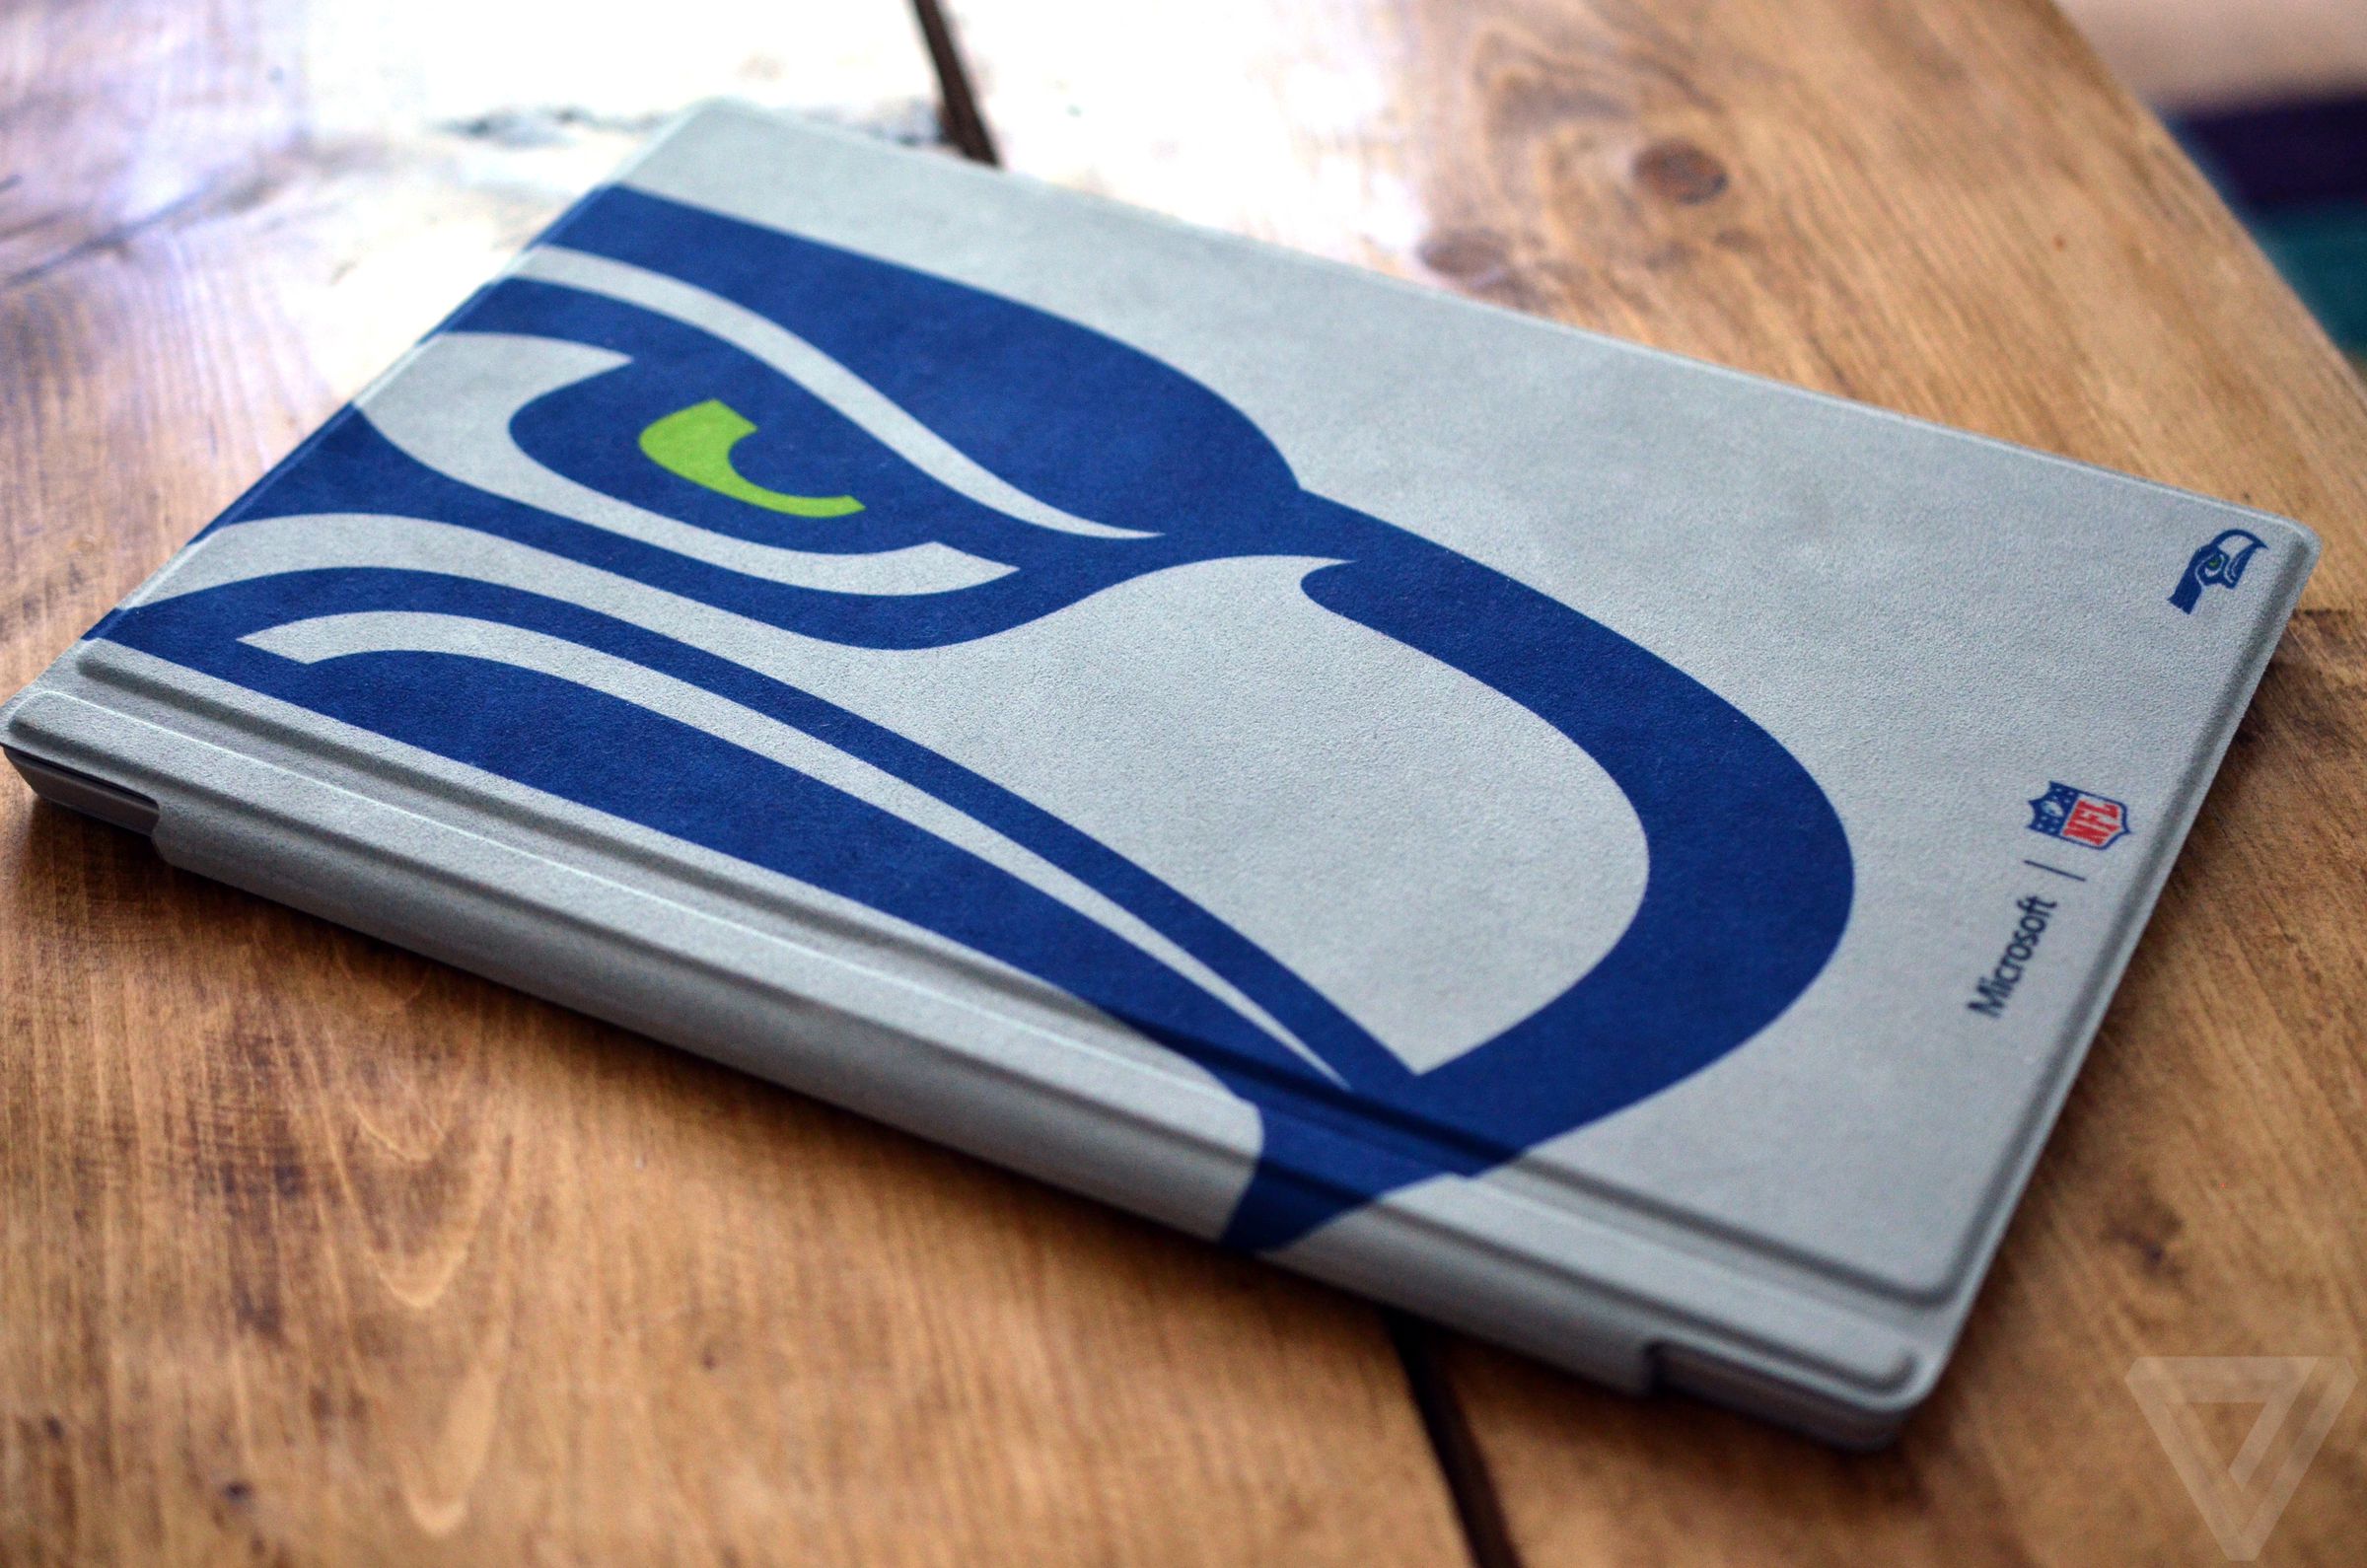 Microsoft NFL Surface Type covers